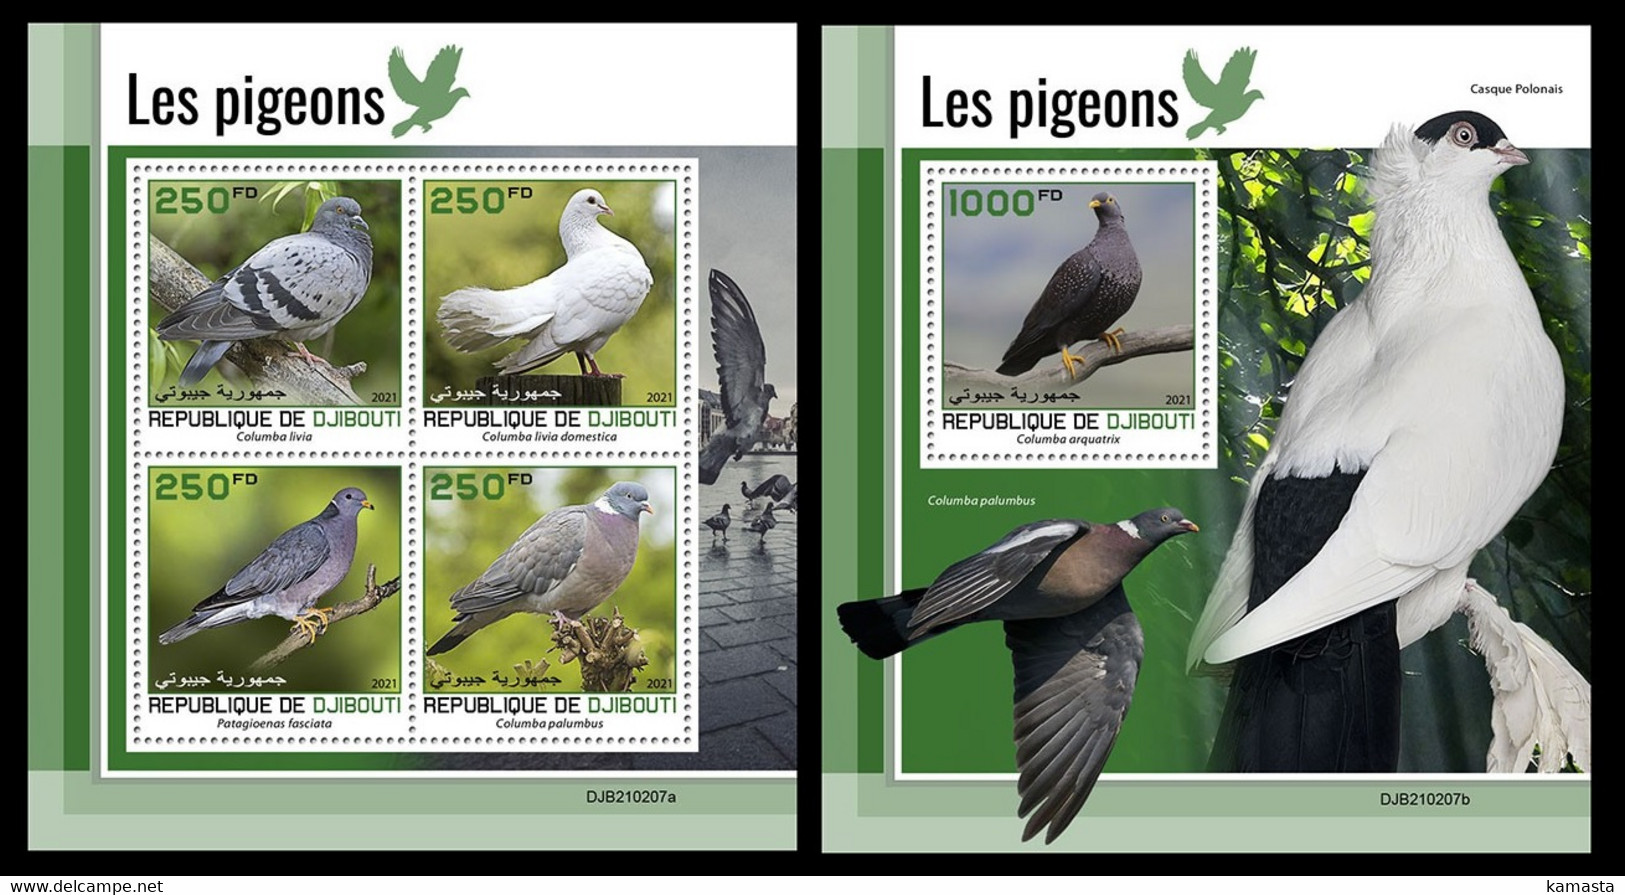 Djibouti 2021 Pigeons. (207) OFFICIAL ISSUE - Pigeons & Columbiformes